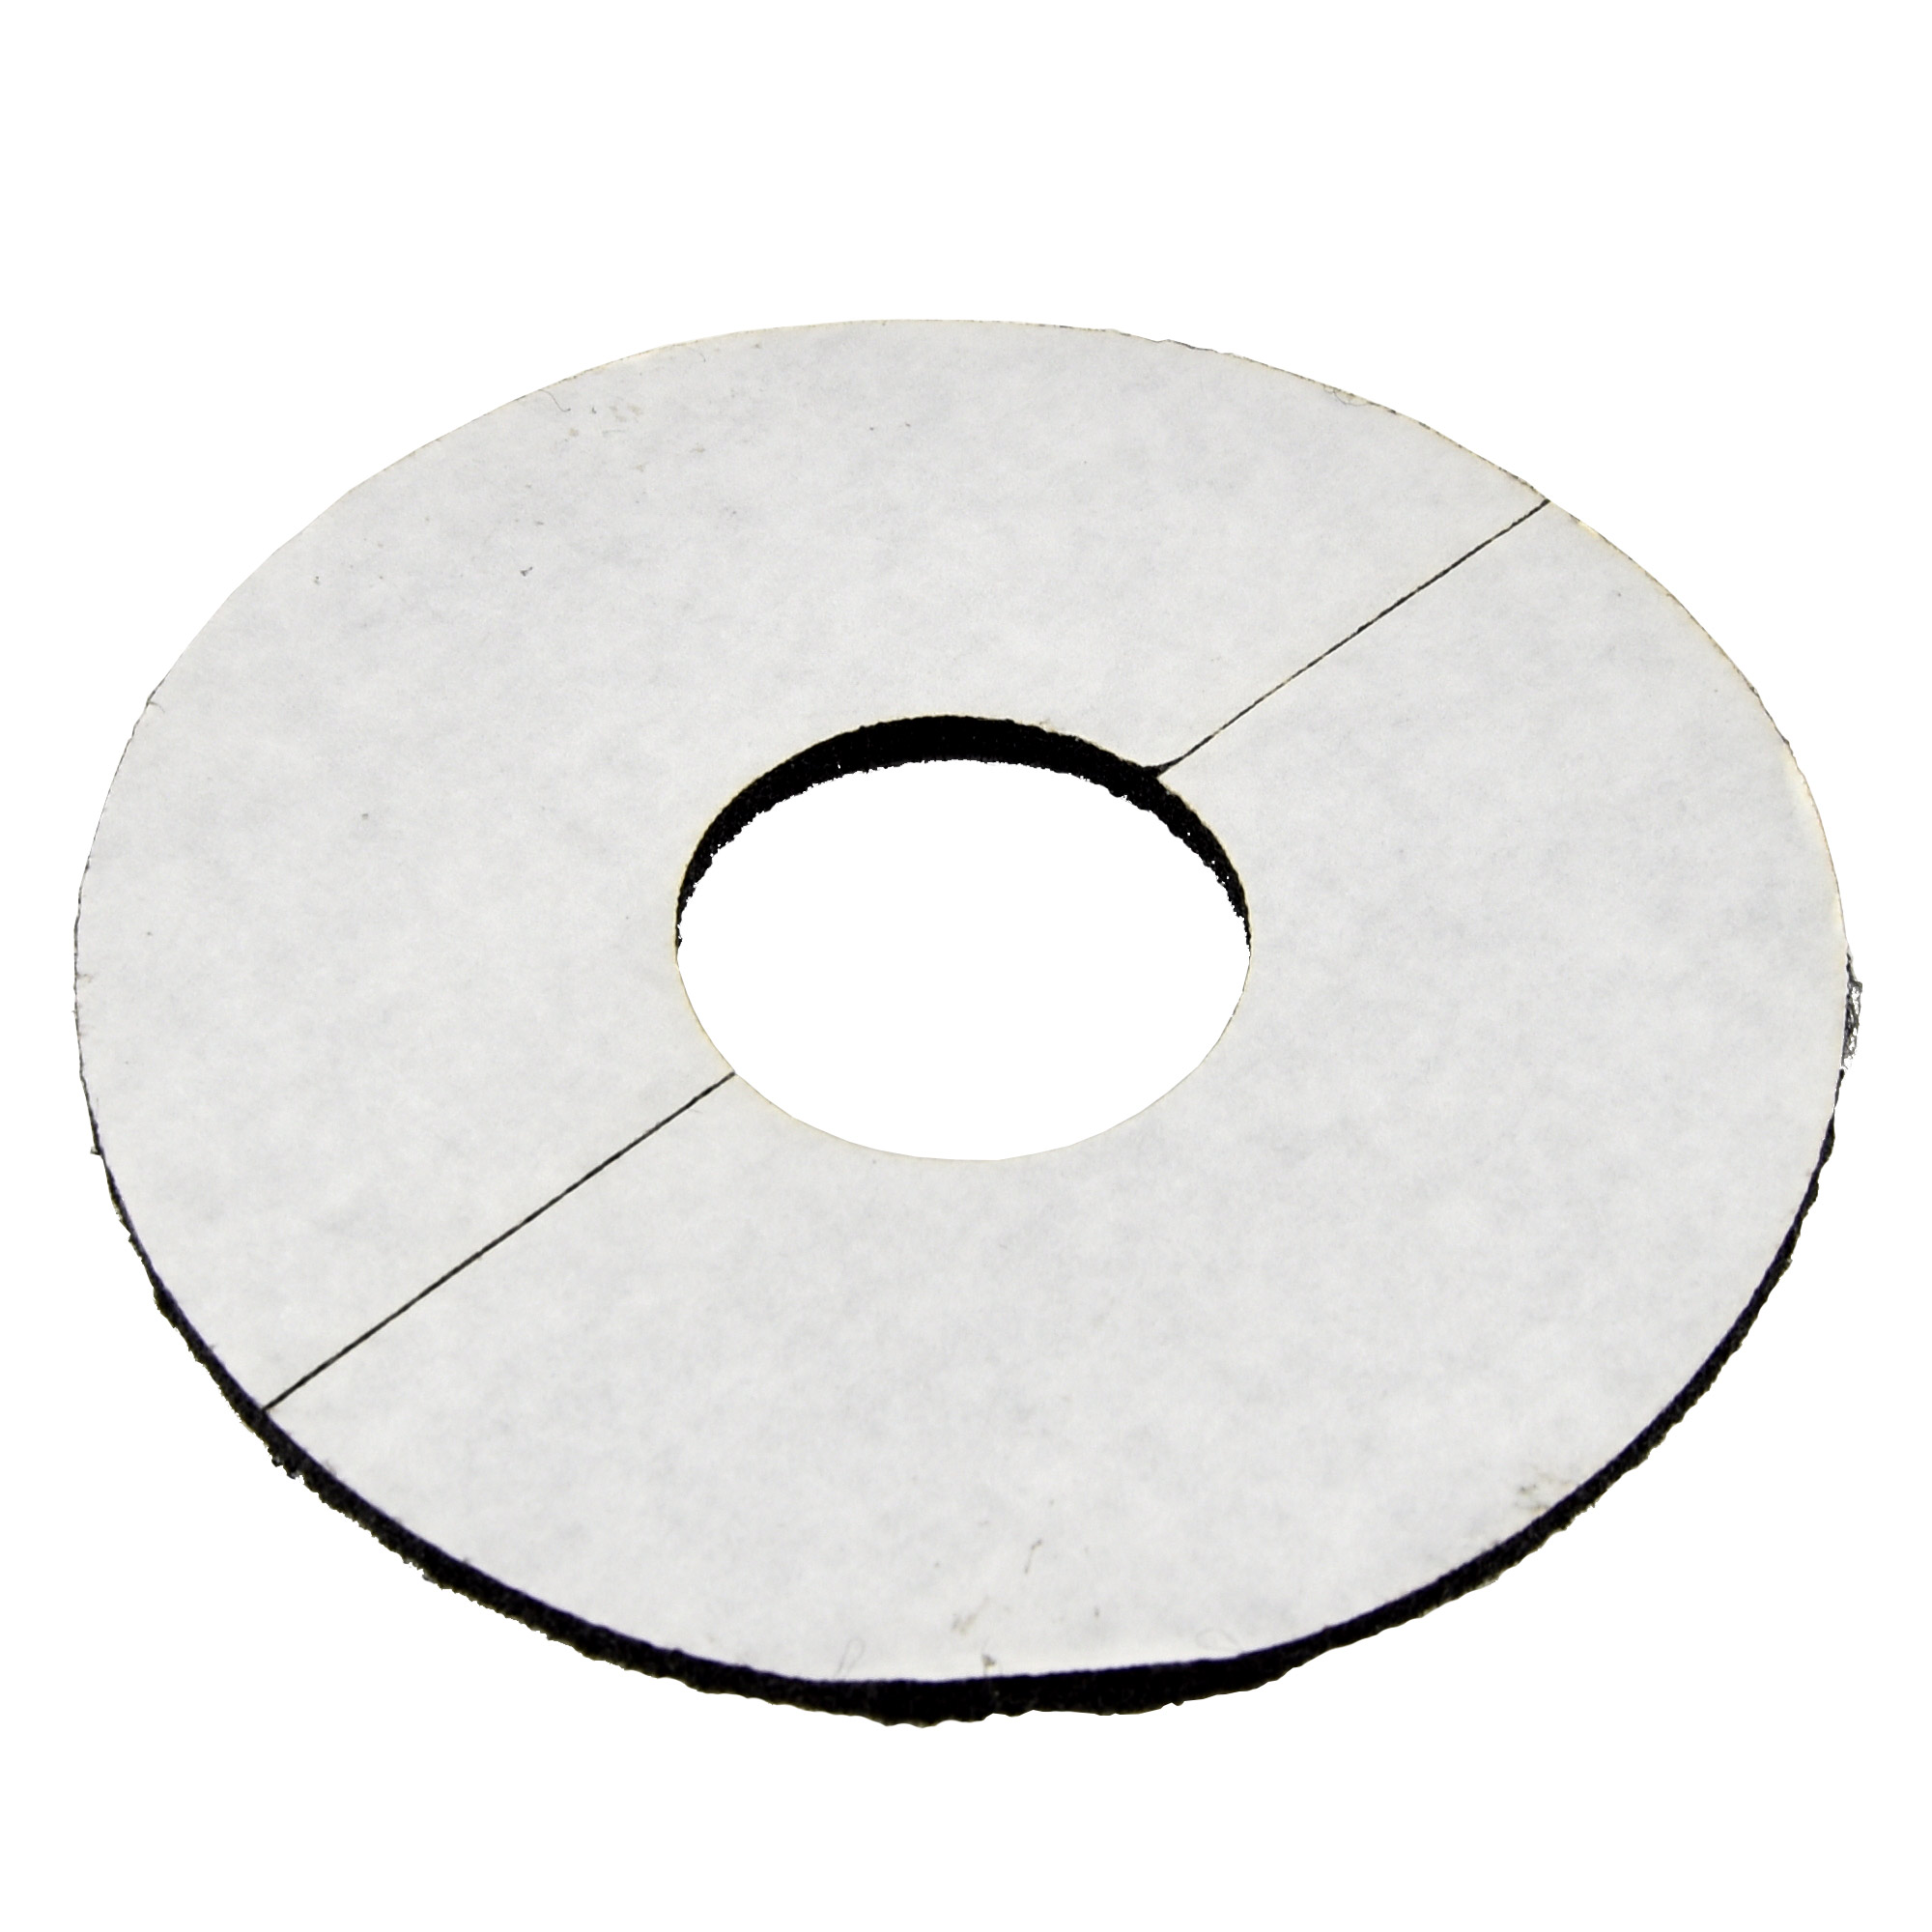 Replacement felt for Airhockey Pusher Tournament 100mm